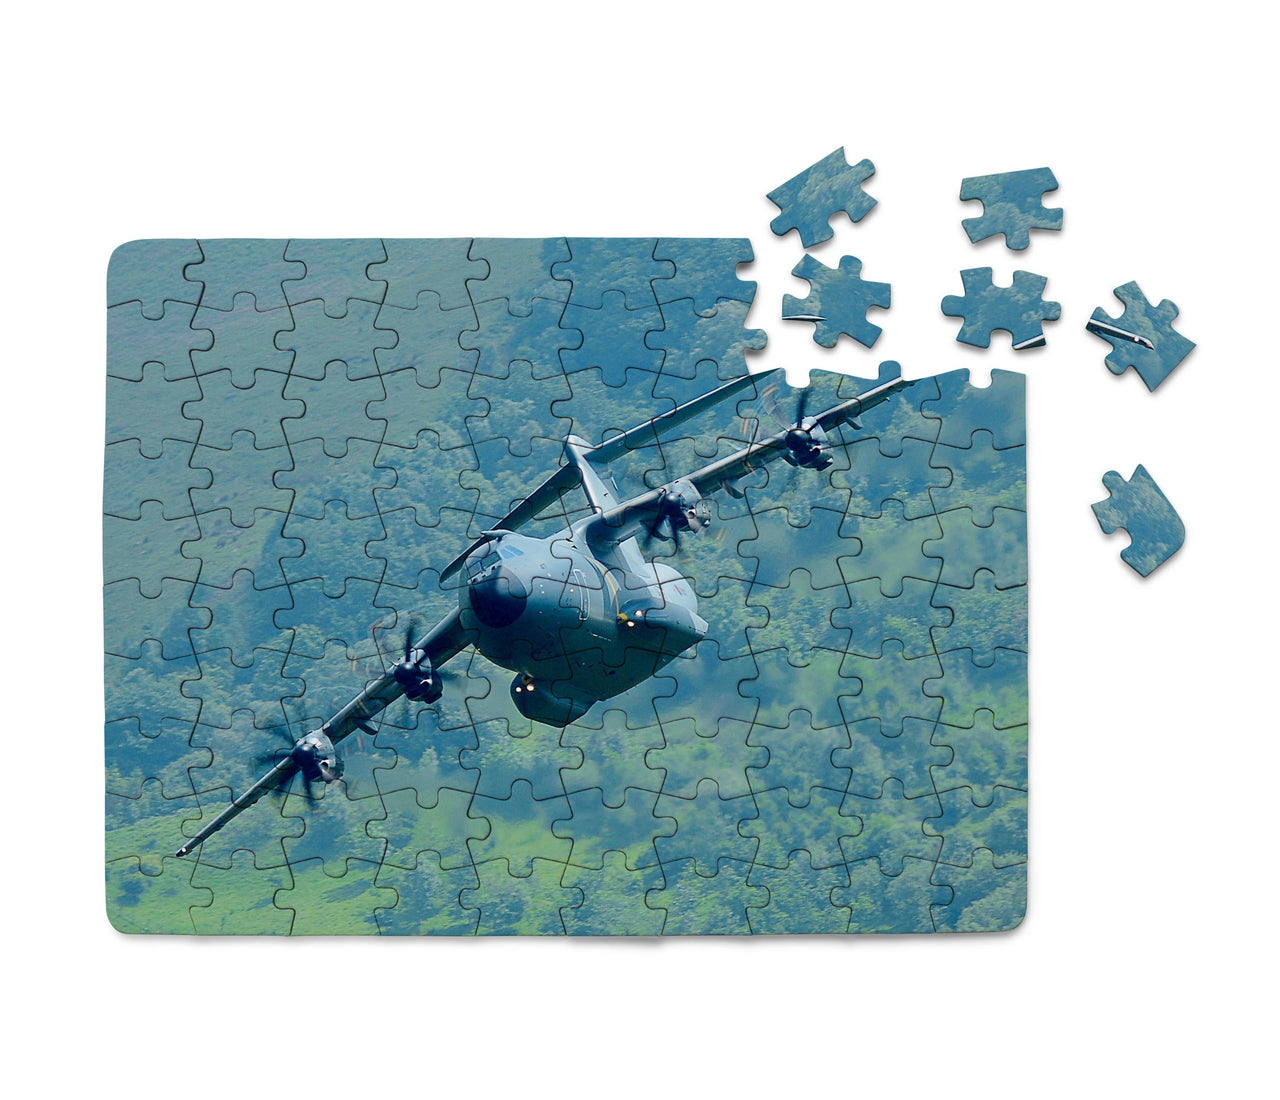 Cruising Airbus A400M Printed Puzzles Aviation Shop 